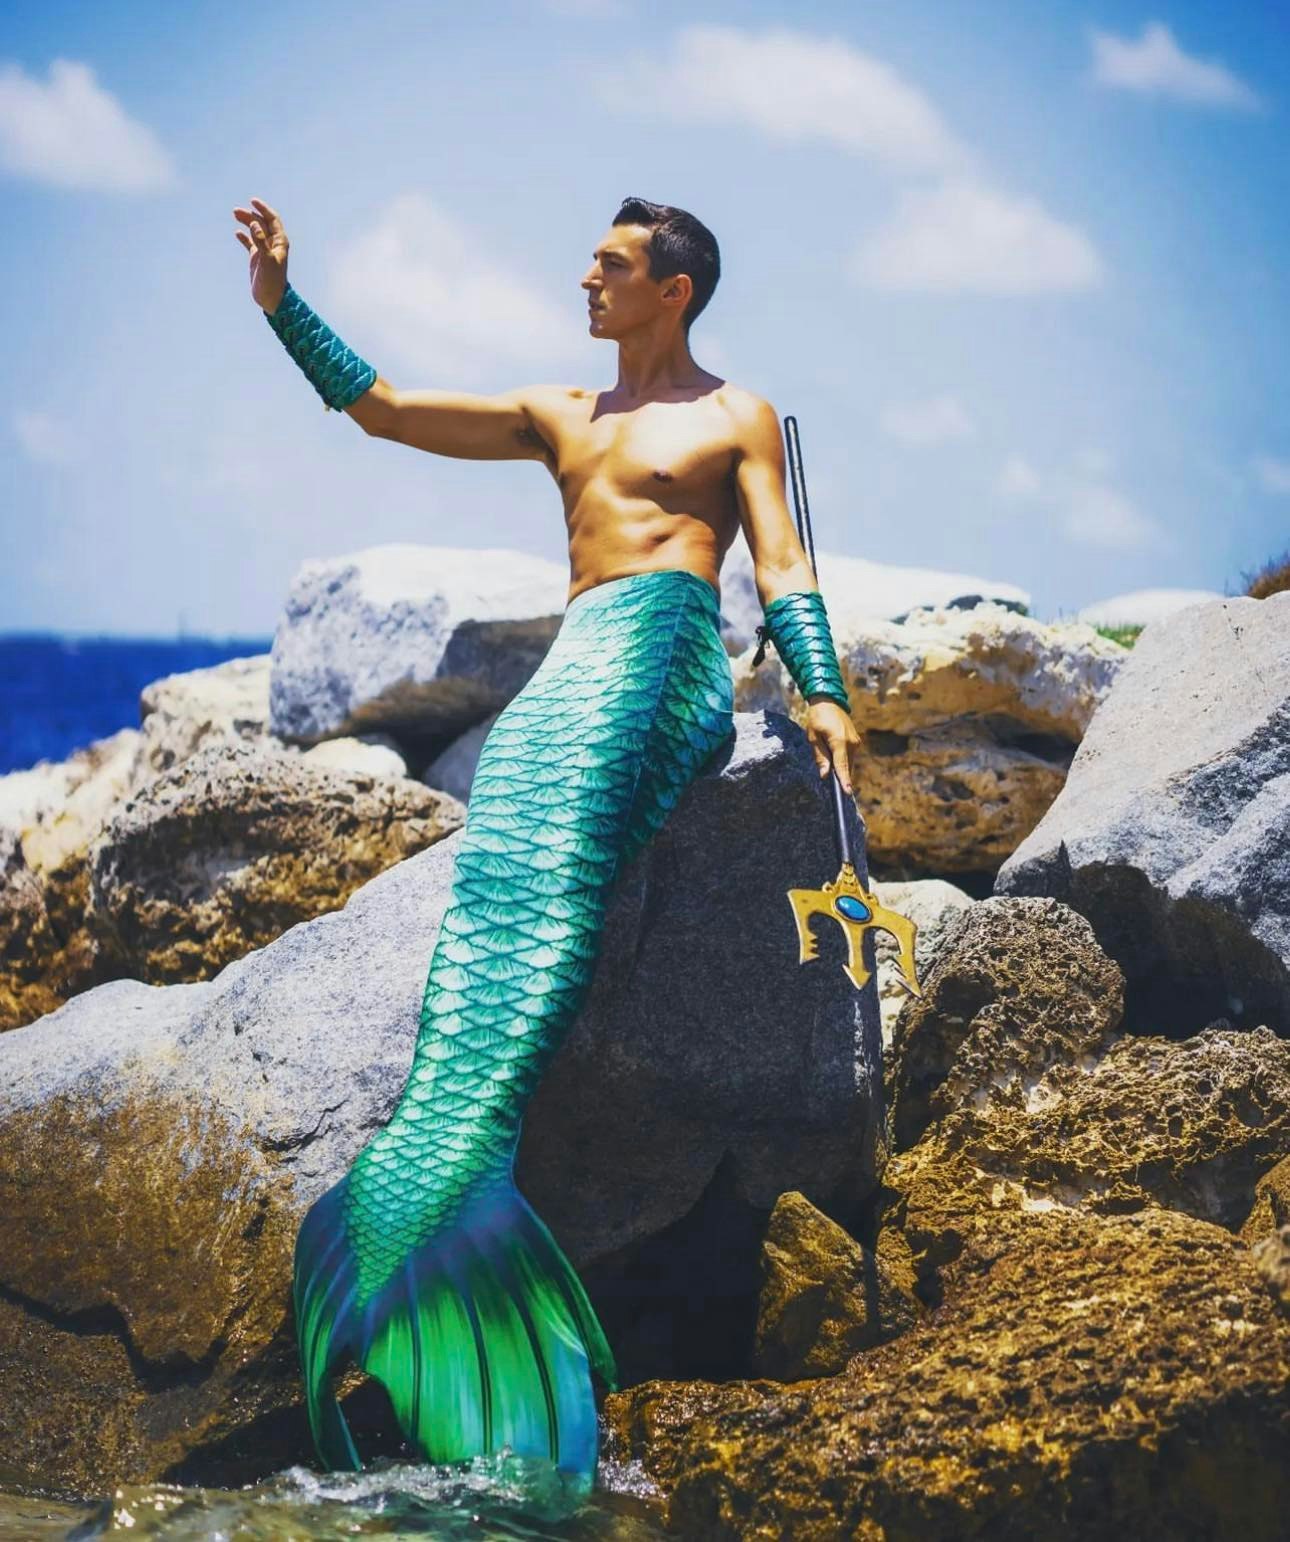 Merman Andrew sits on a rock, right arm aloft, with a three-pronged trident in his hand and his green mermaid tail drooping down towards the beach